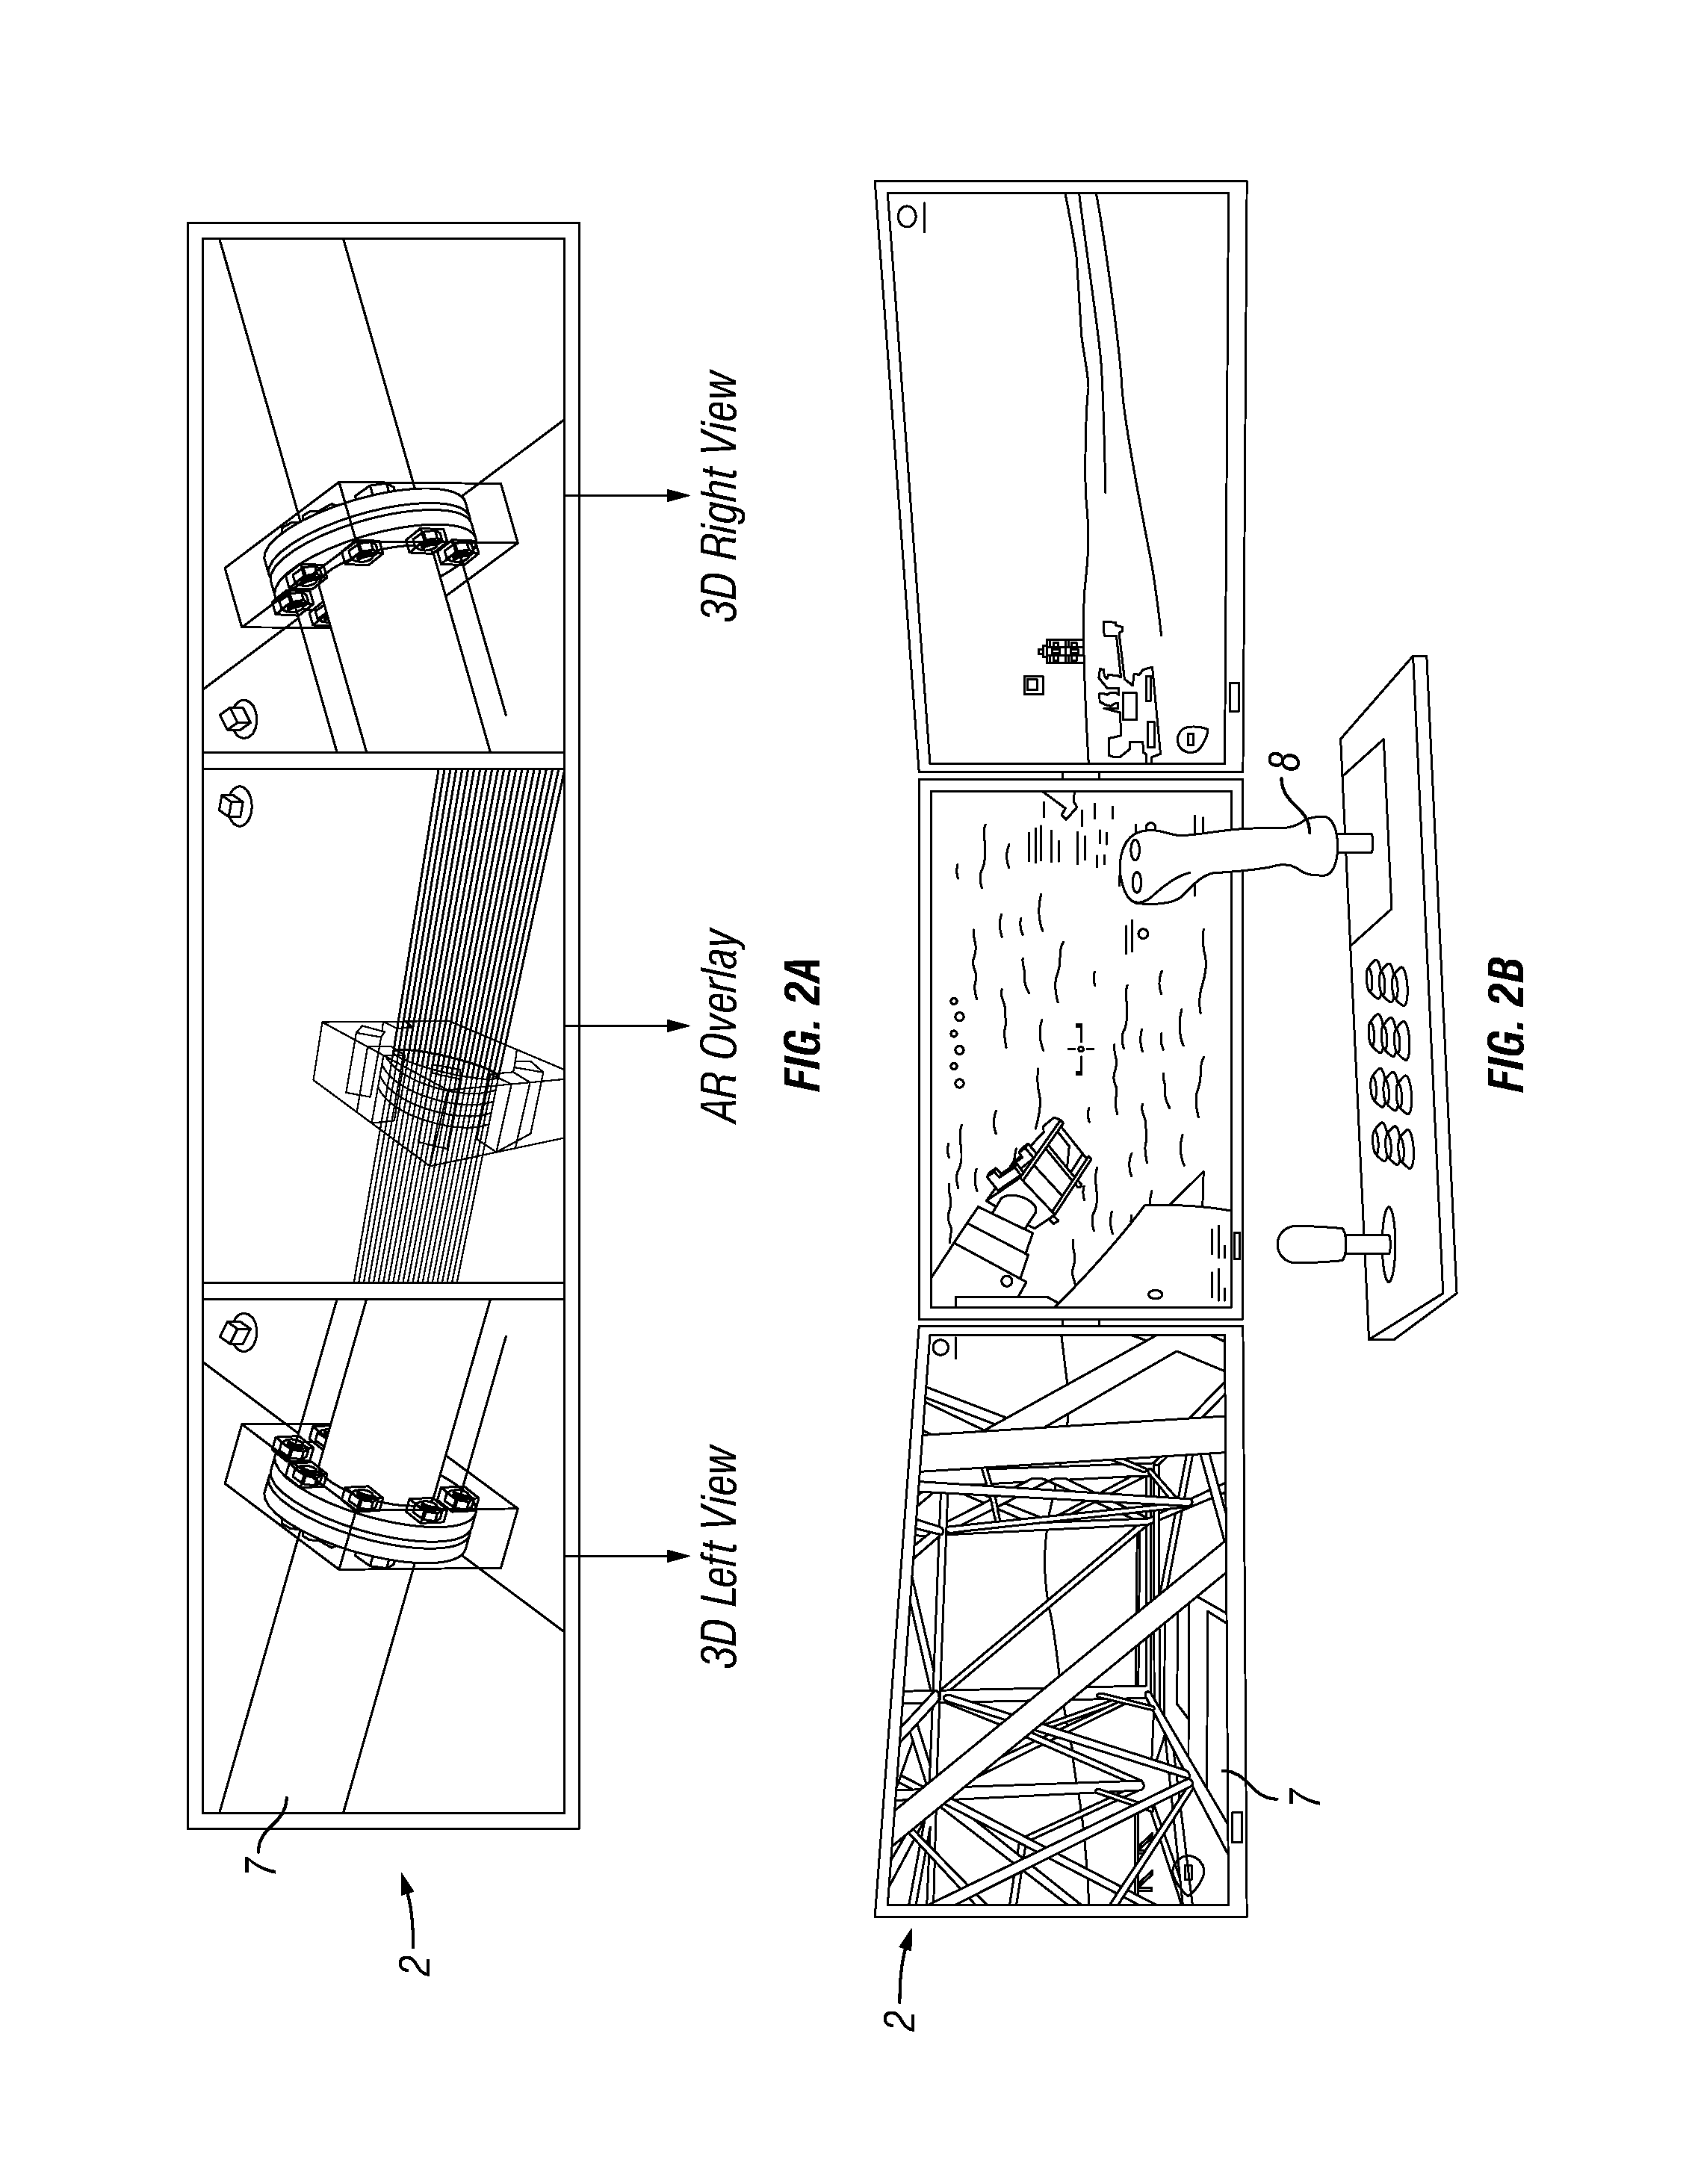 System and method of operation for remotely operated vehicles with superimposed 3D imagery